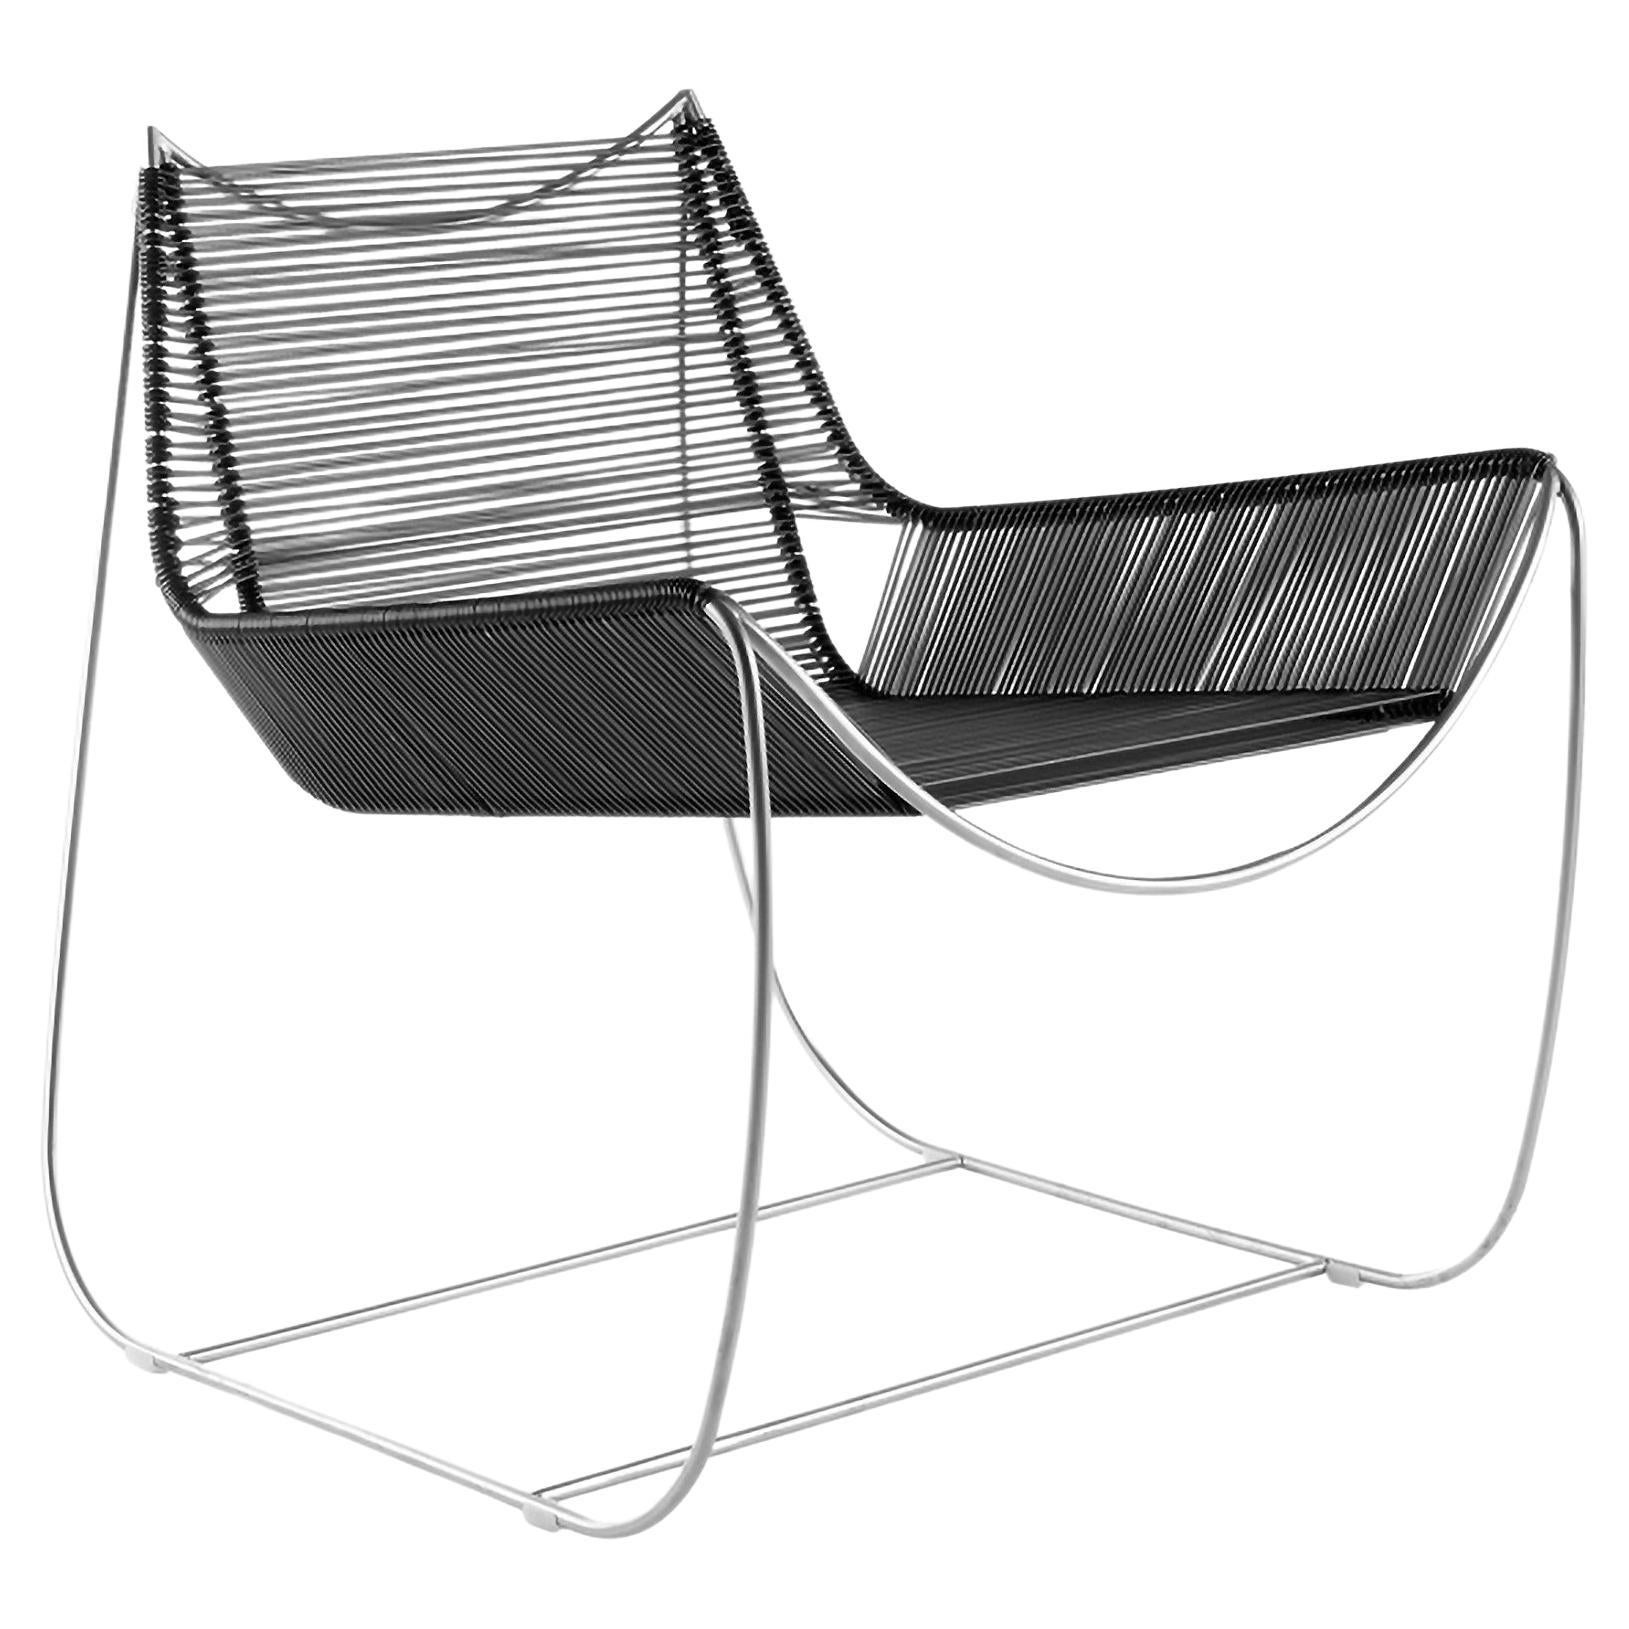 SundayMorning, Stainless Steel LoungeChair Made in Italy edizioni Enrico Girotti For Sale